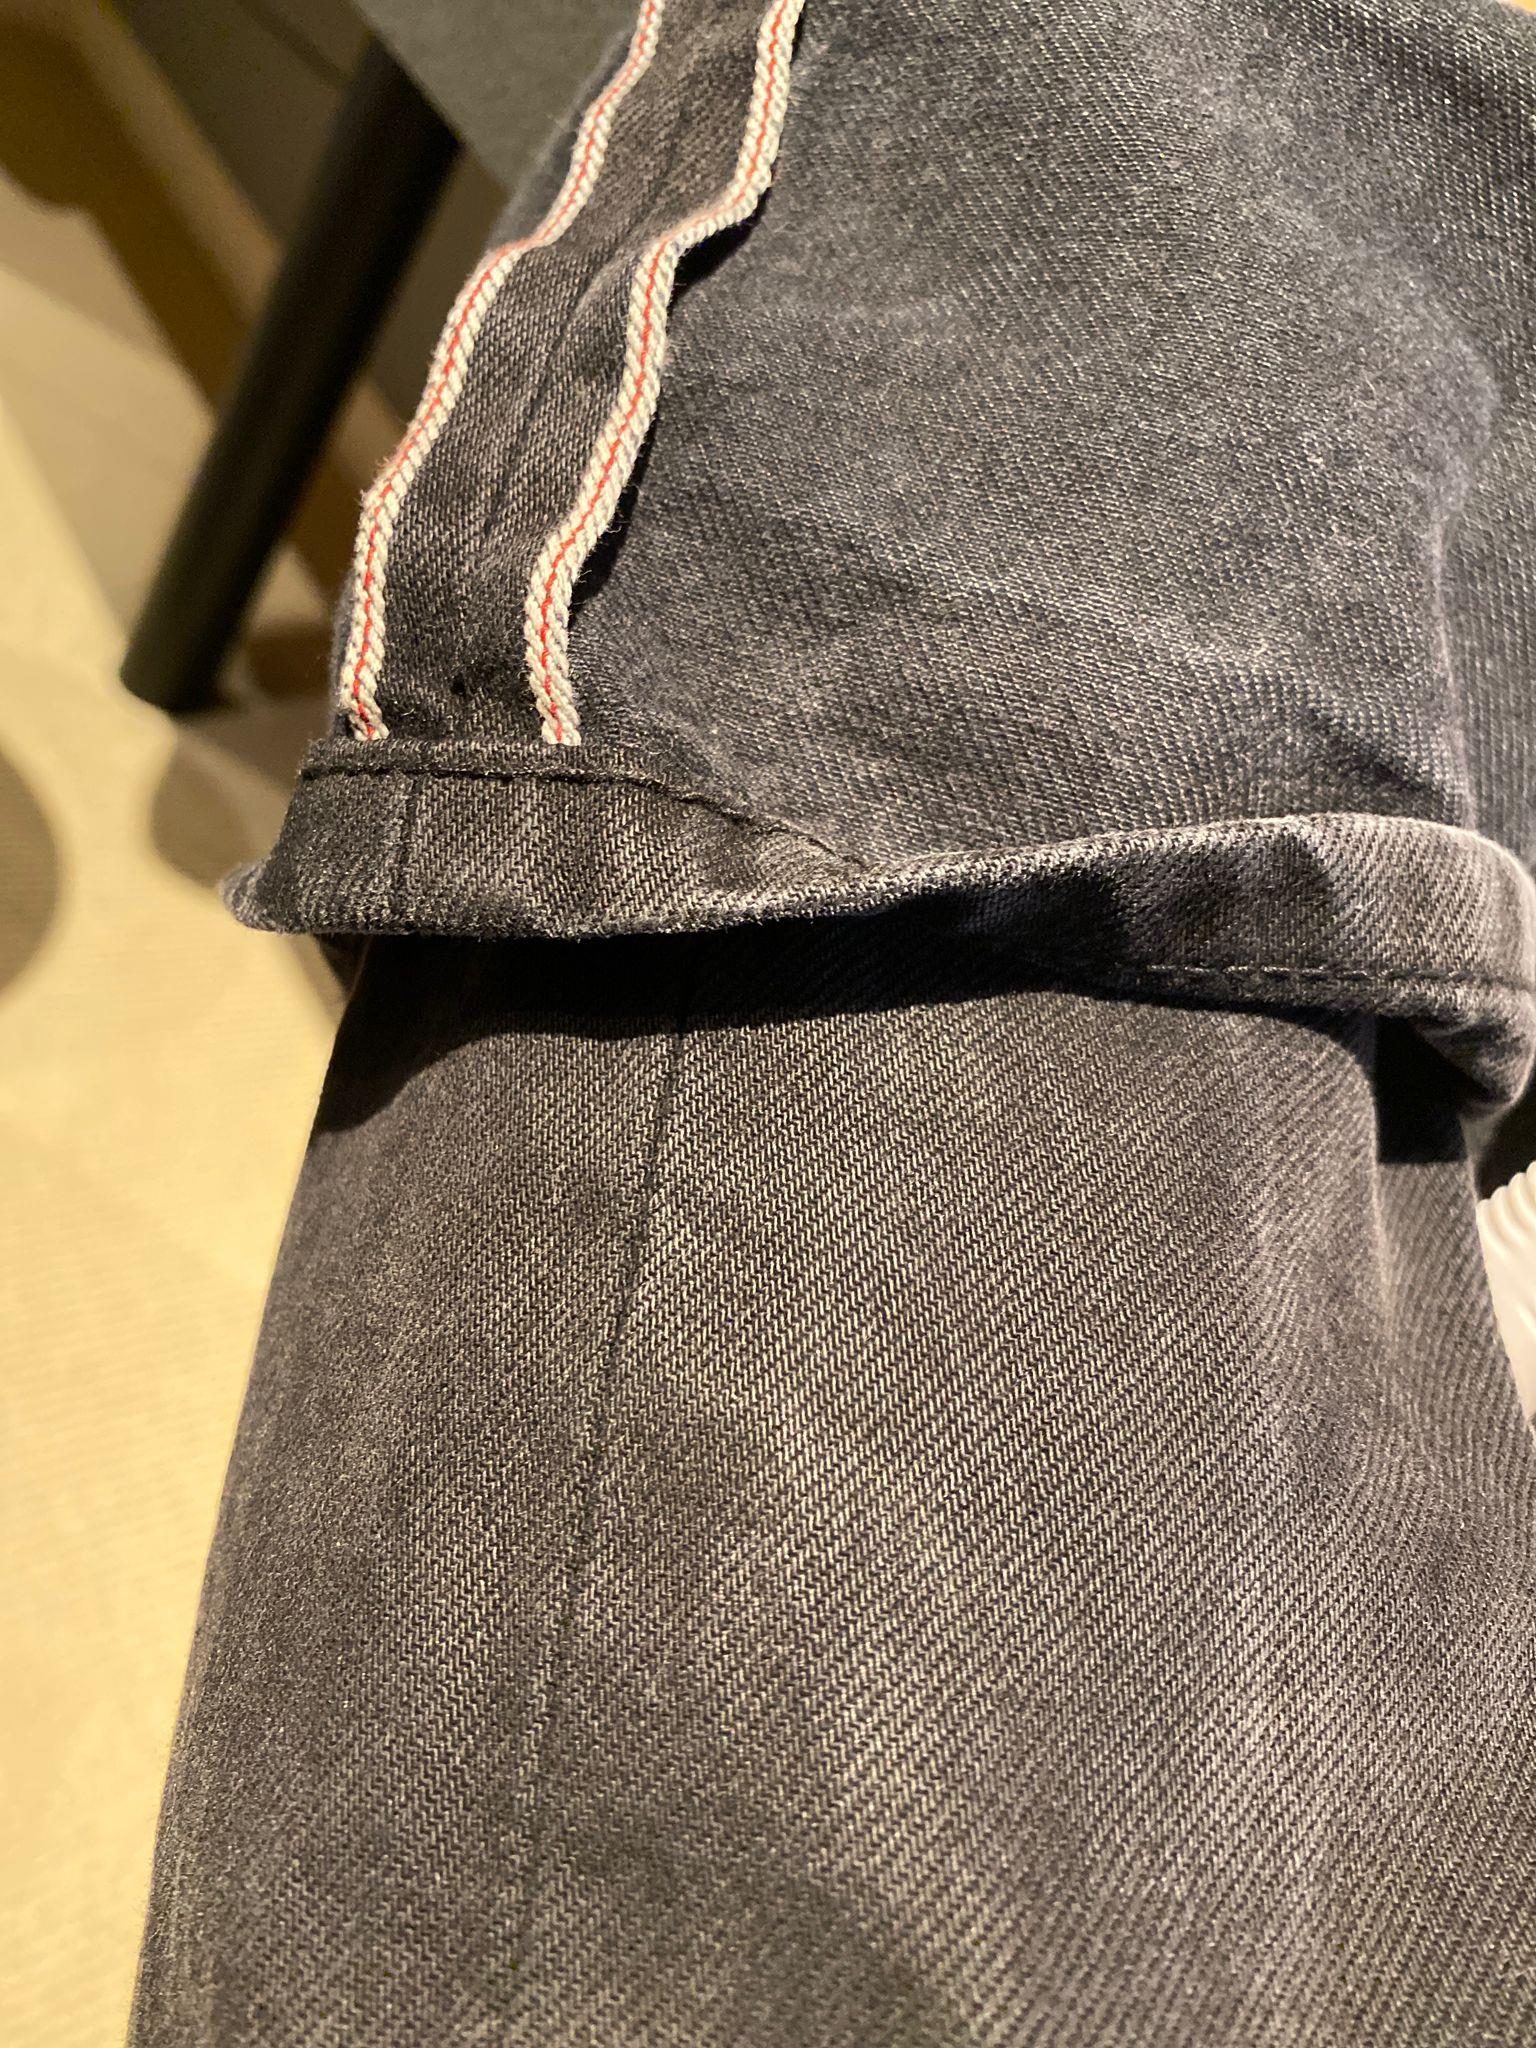 How do you get the smell out of black on black selvedge jeans?